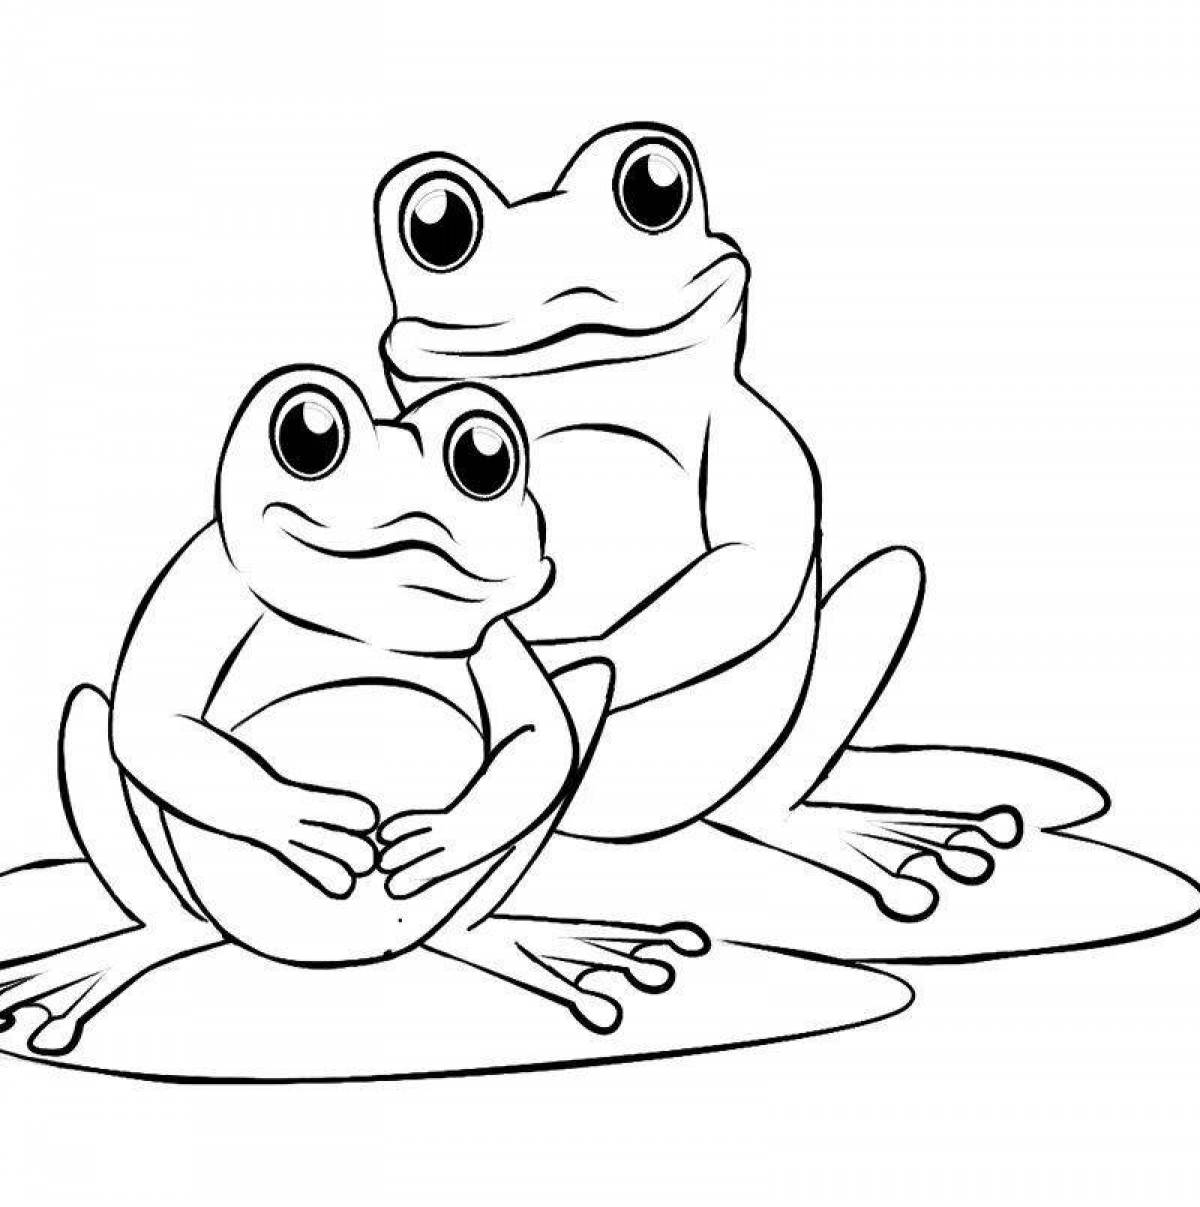 Sweet frog coloring pages for kids